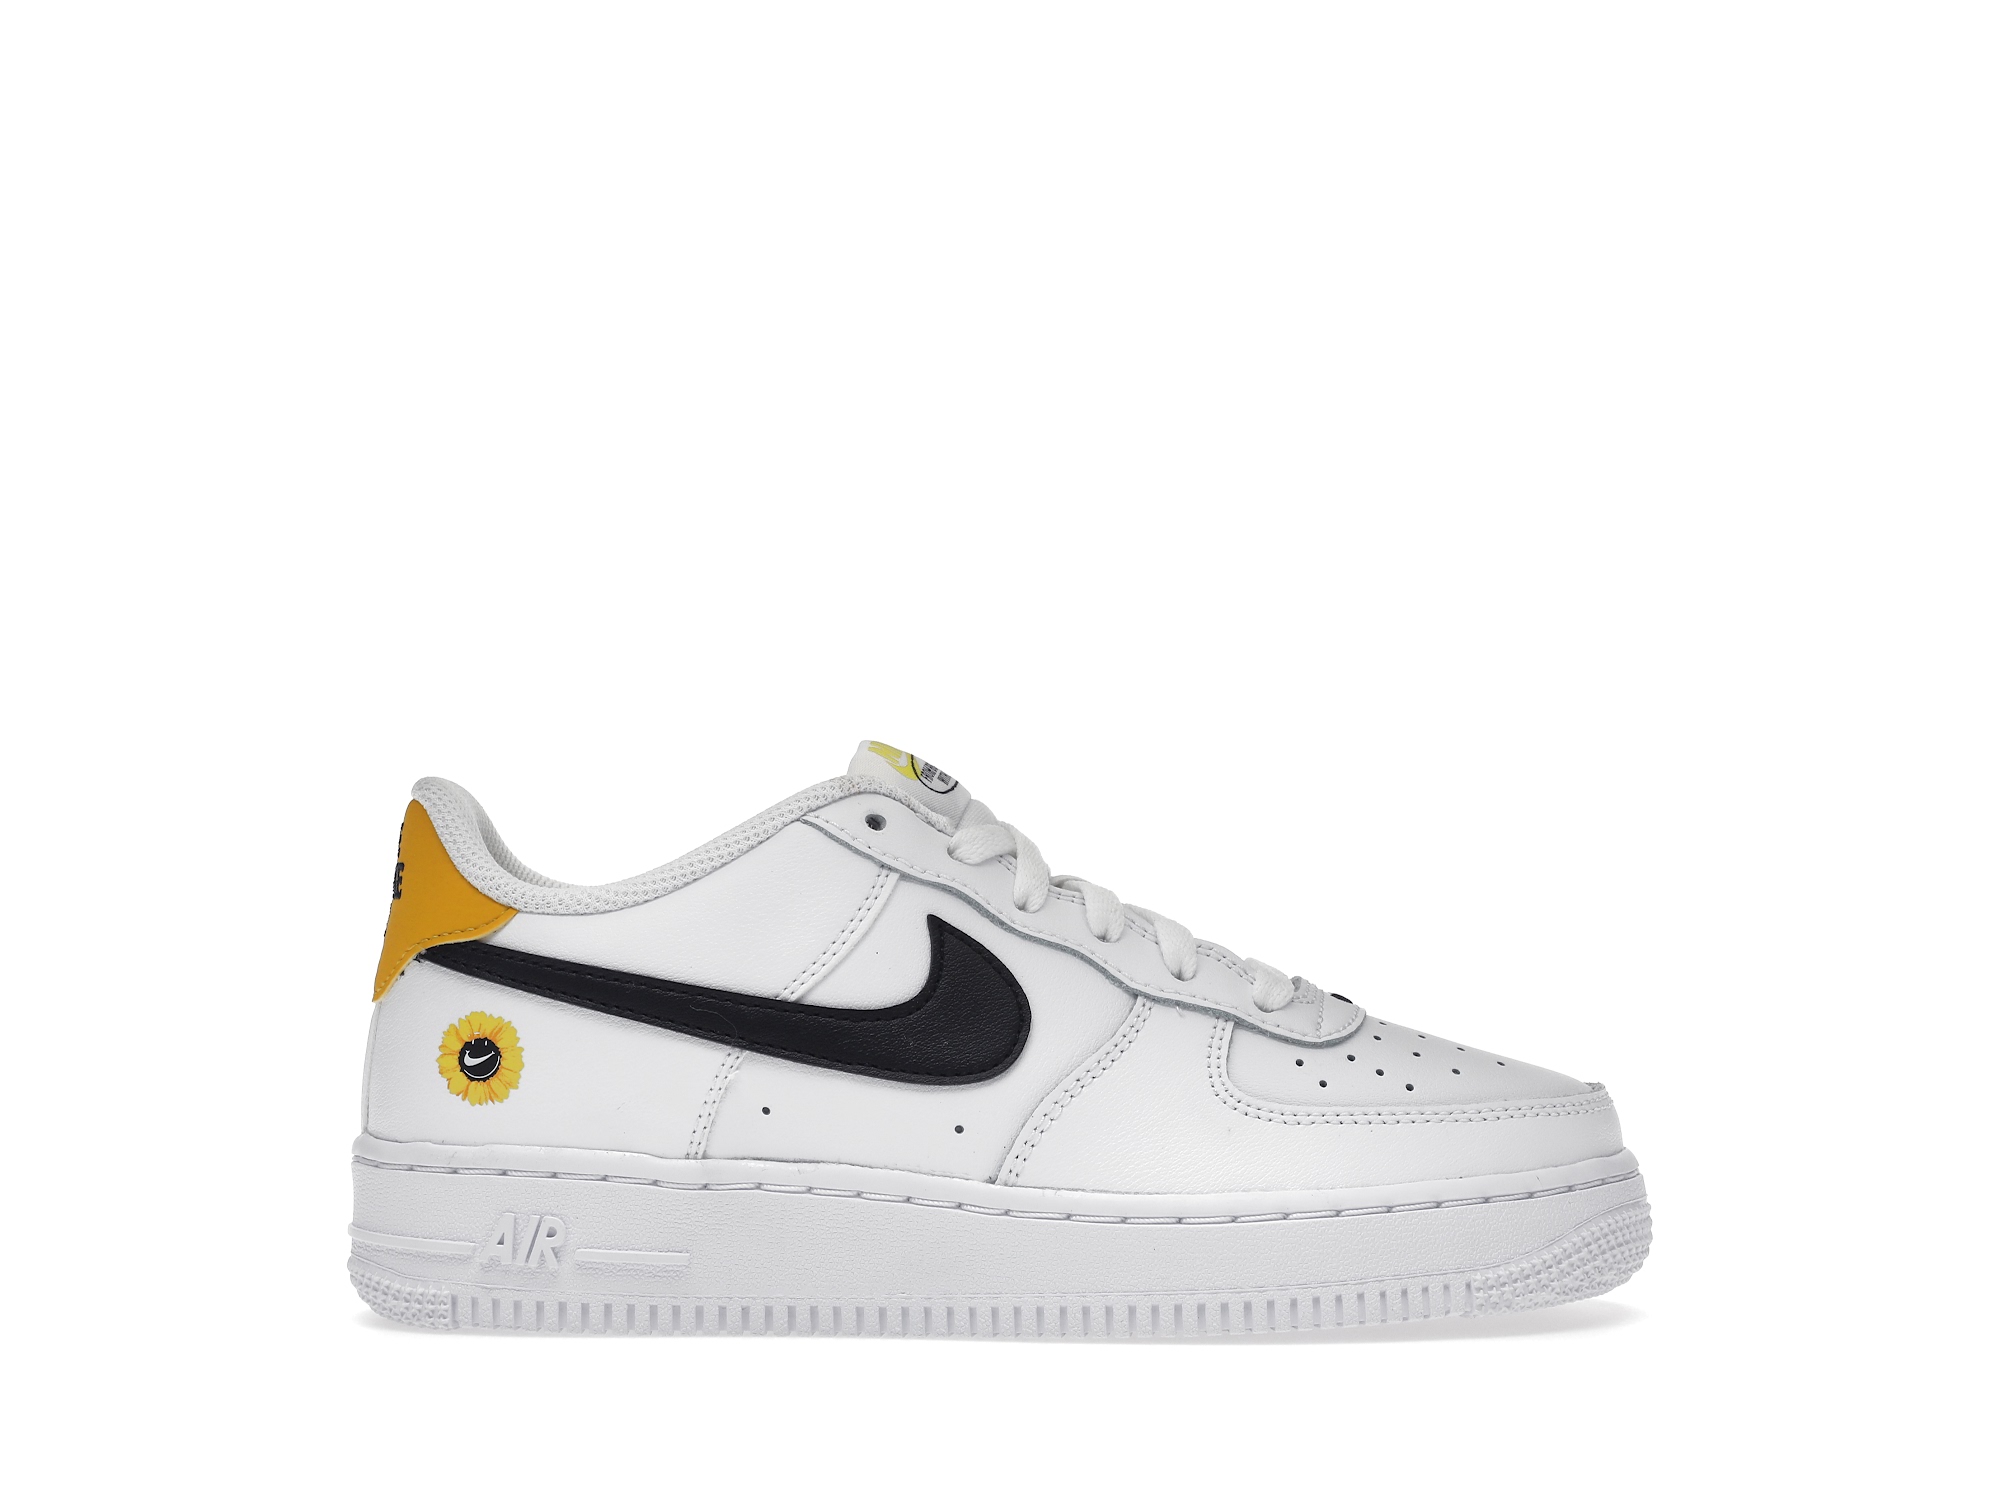 Nike Air Force 1 Low Have a Nike Day White Daisy (GS) Kids